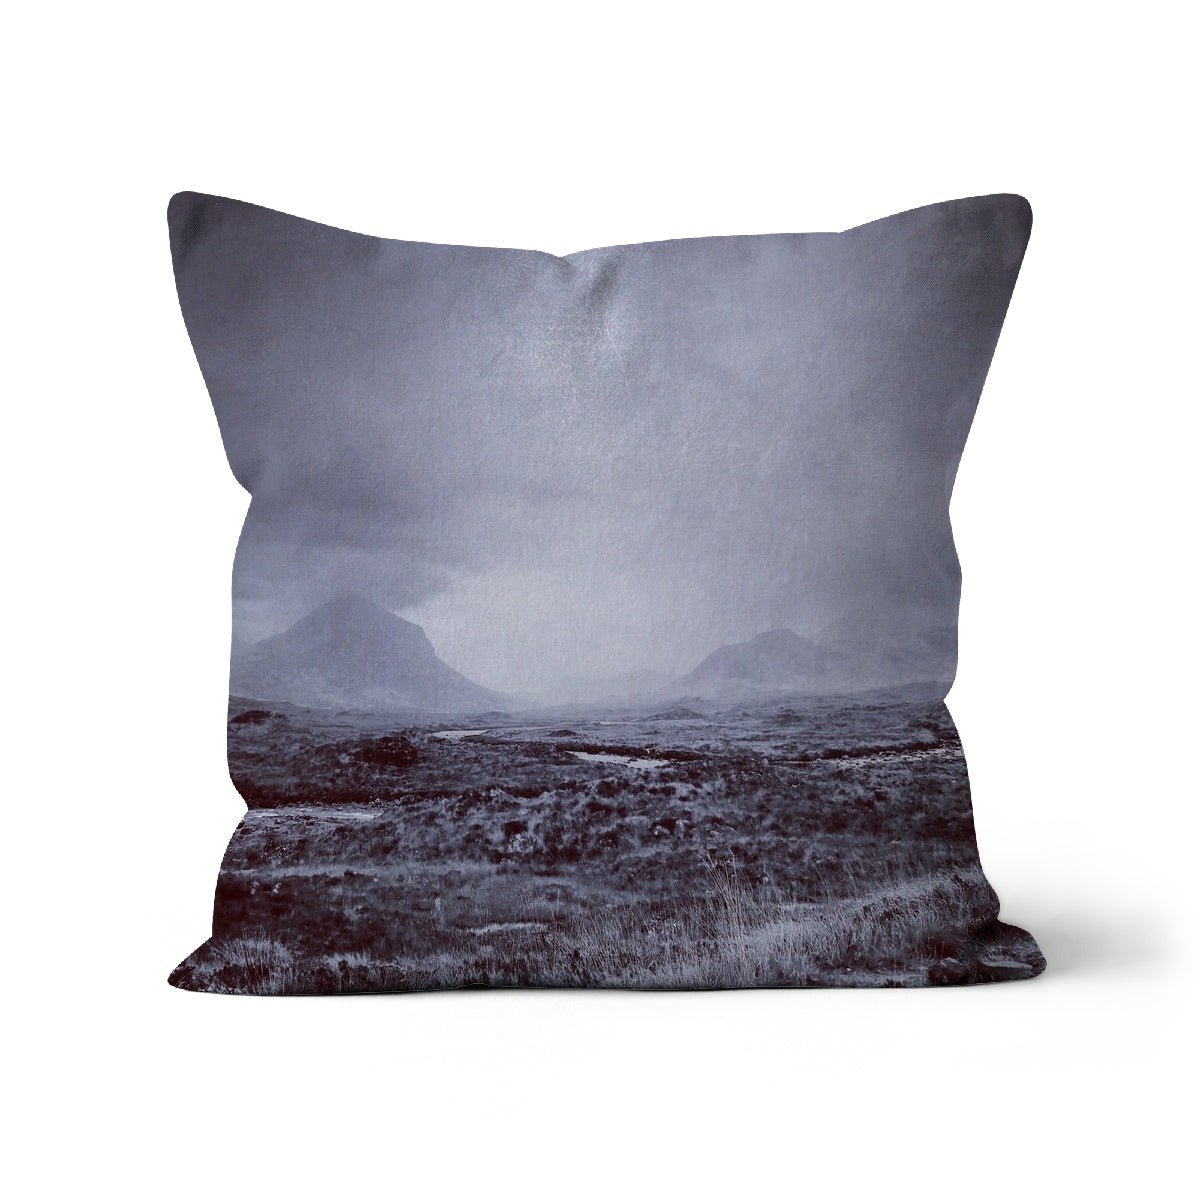 The Brooding Cuillin Skye Art Gifts Cushion-Cushions-Skye Art Gallery-Linen-16"x16"-Paintings, Prints, Homeware, Art Gifts From Scotland By Scottish Artist Kevin Hunter